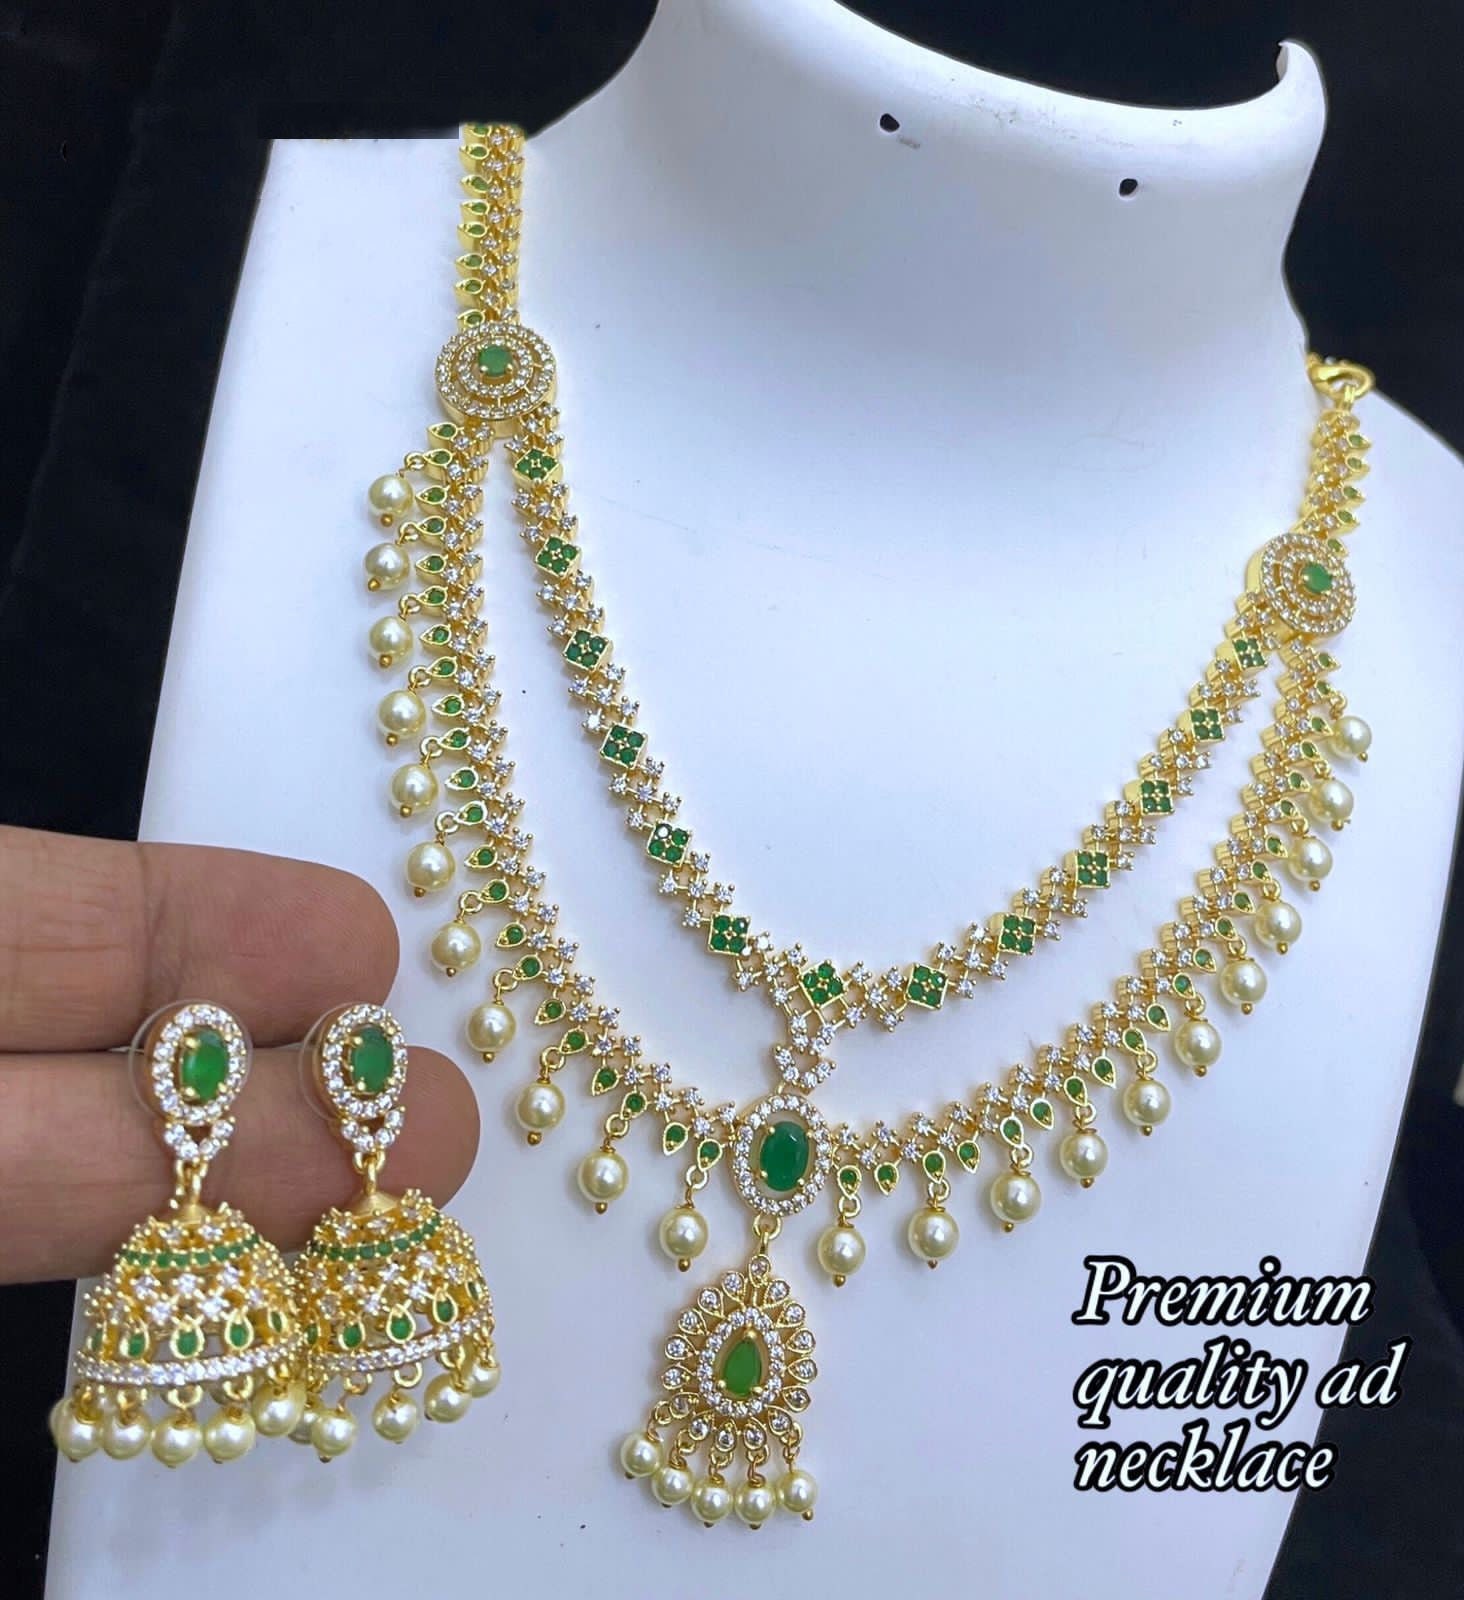 Gorgeous American Diamond Two Layer Necklace With Pearl Drops South Indian  Style AD Color Stone Jewelry Ruby Emerald Crystal Necklace - Etsy